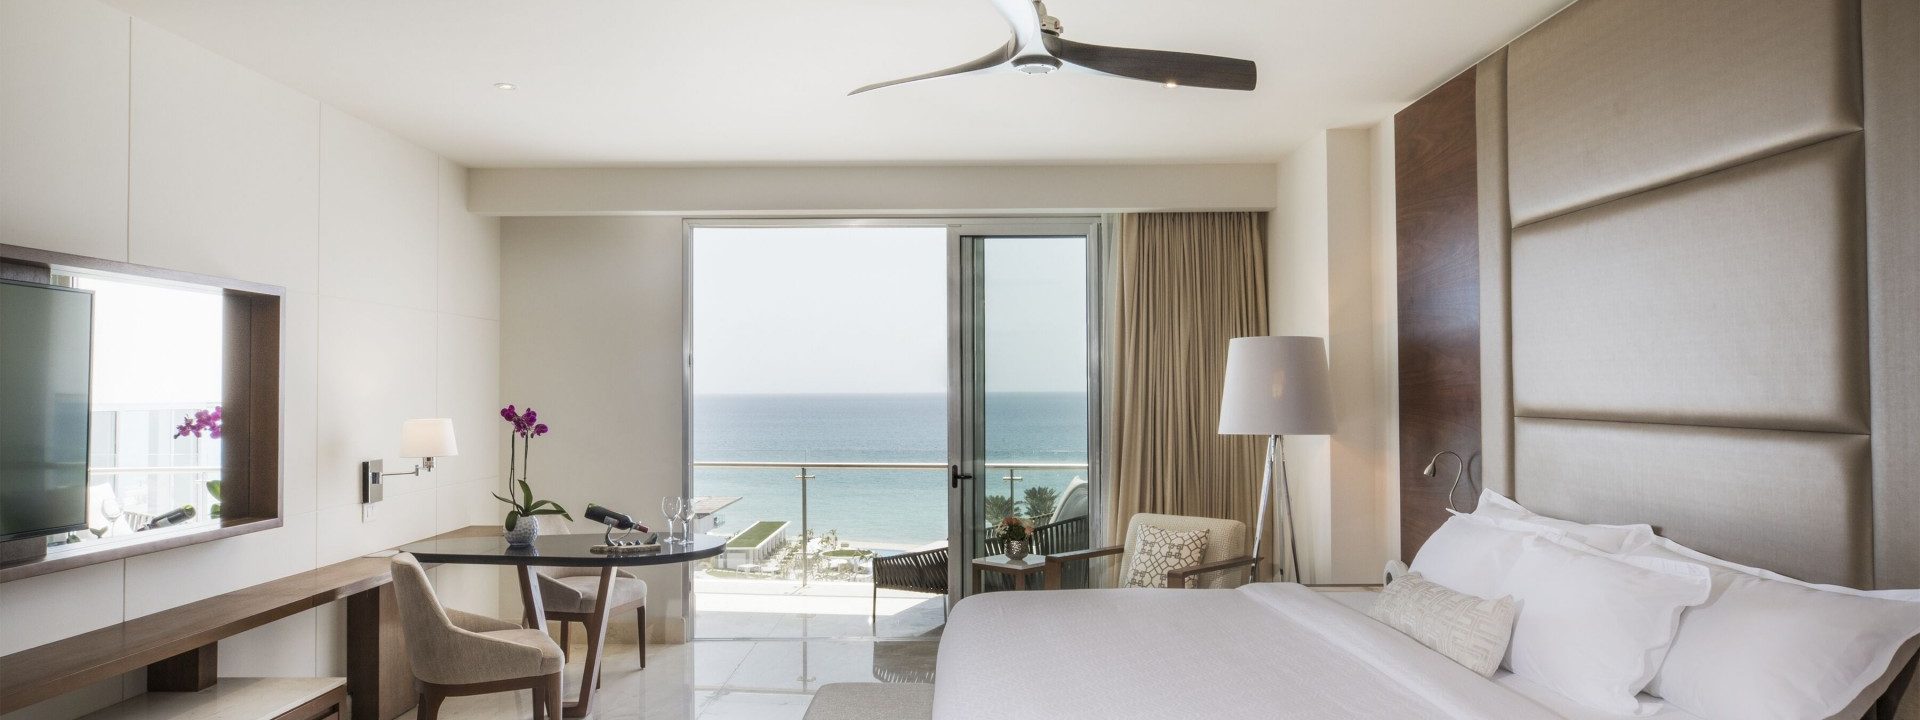 Le Blanc Spa Resort makes a white-hot debut in Los Cabos